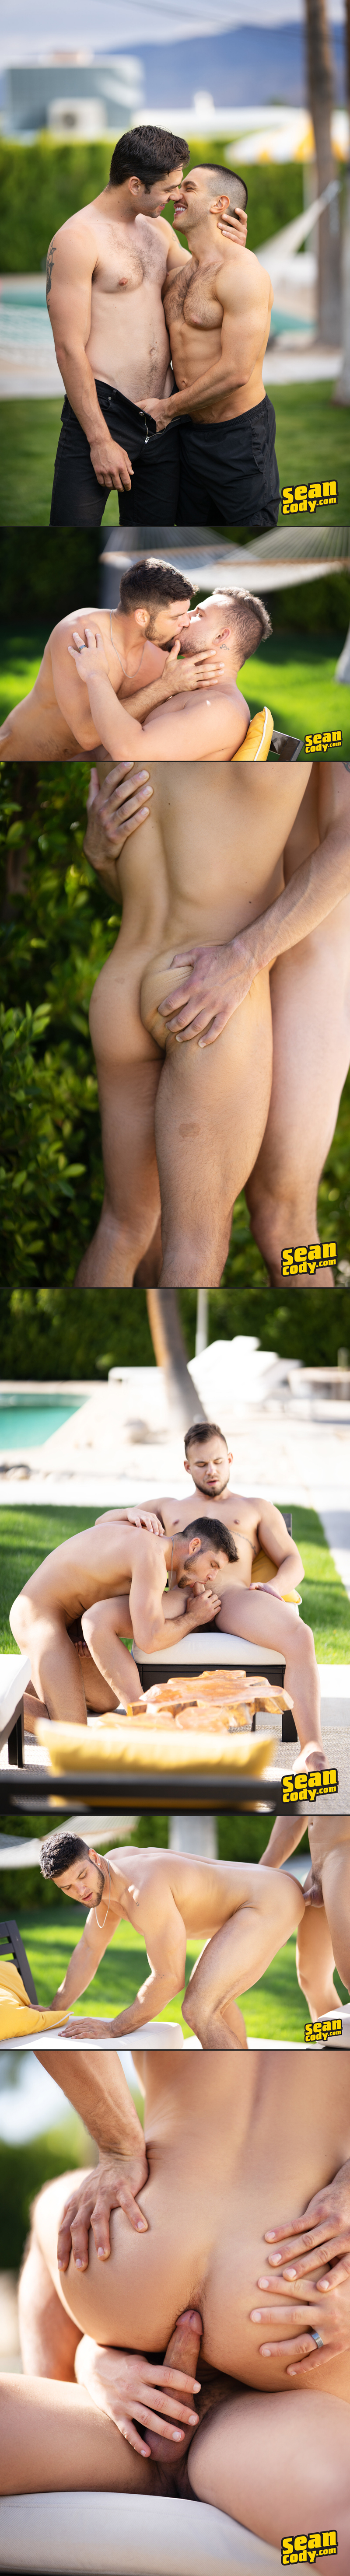 Palm Springs Getaway, Part 4 (Devy, Nicky and Phillip) at SeanCody